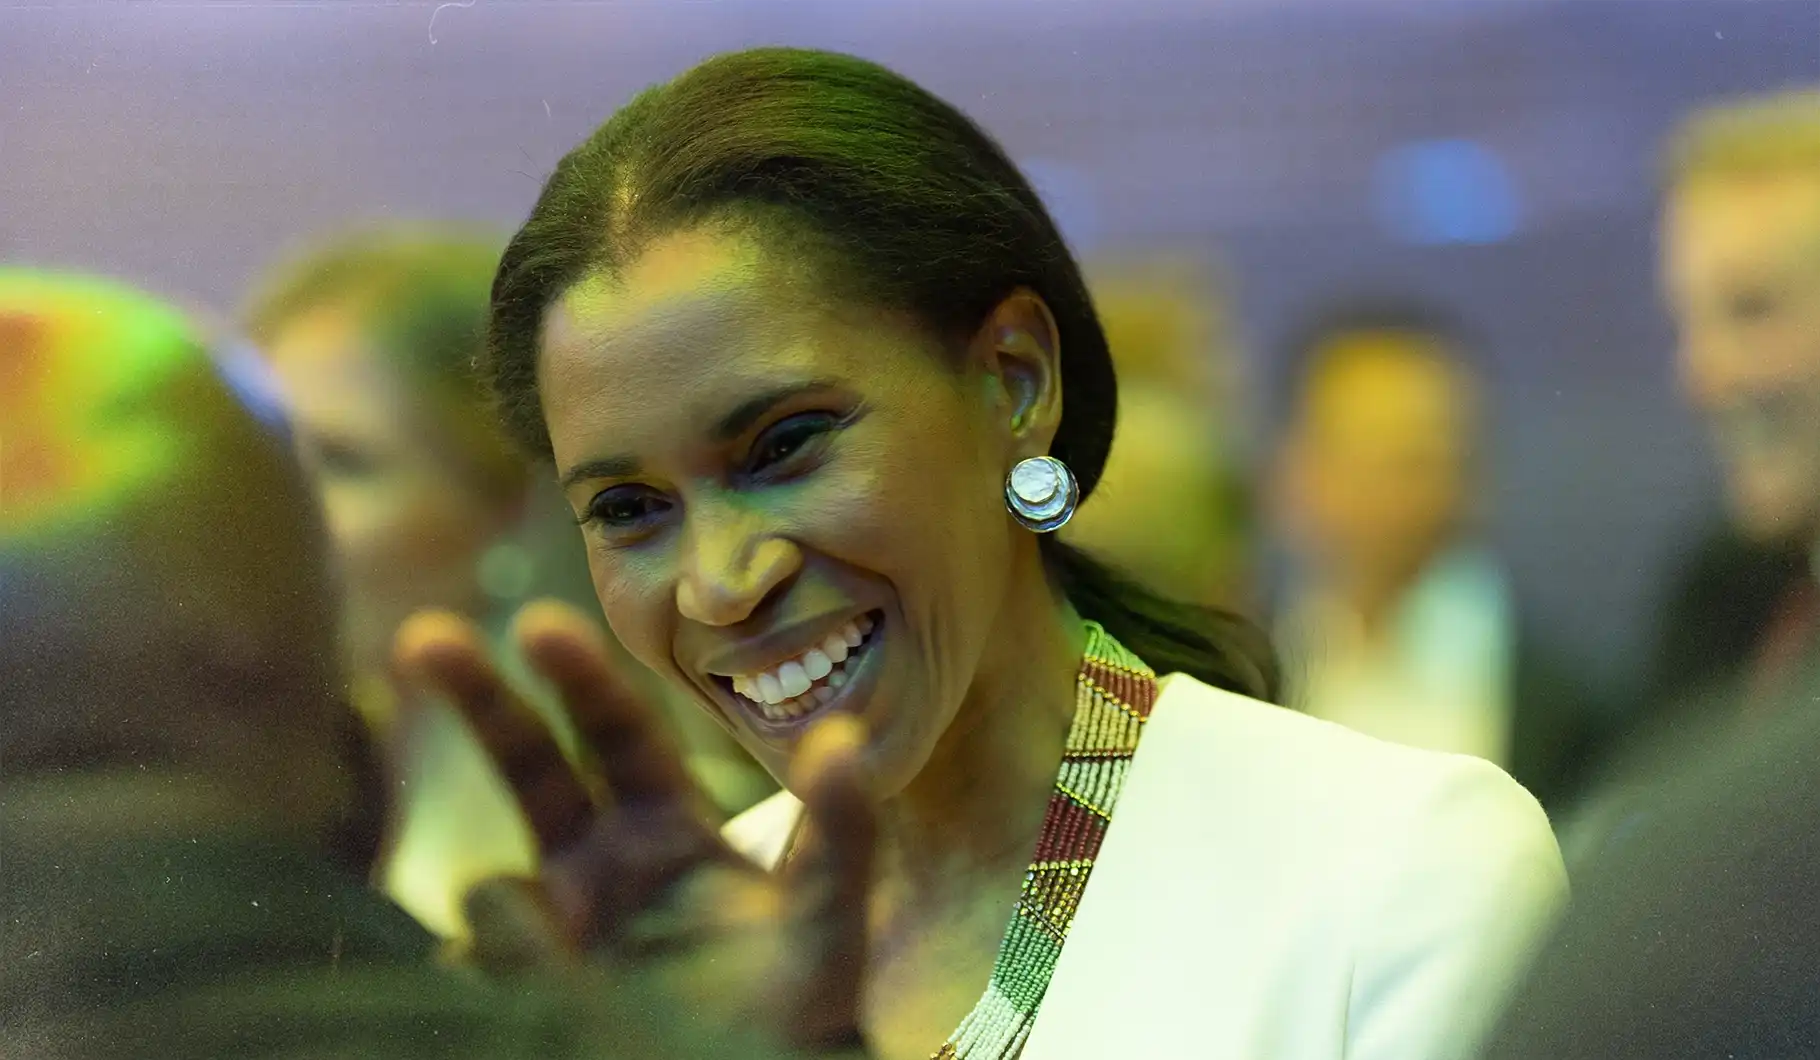 Smiling attendee wearing a colorful beaded necklace and large earrings holding a conversation at the South African Embassy.